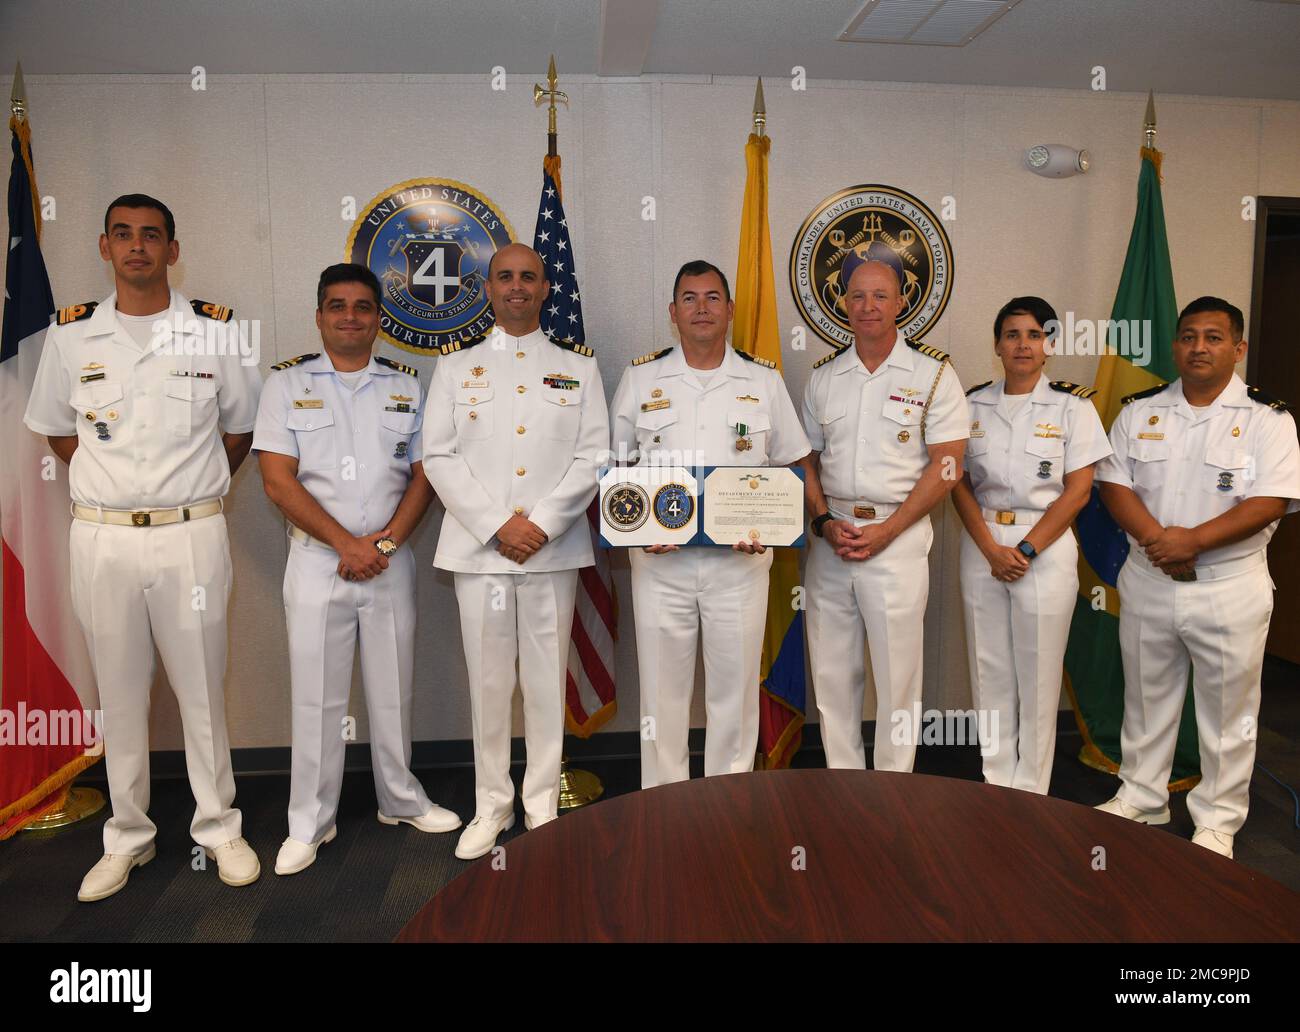 220628-N-DB801-0371  MAYPORT, Fla. – (June 28, 2022) – Colombian navy Capt. Nelson Villalba, center, a Foreign Liaison Officer assigned to U.S. Naval Forces Southern Command/U.S. 4th Fleet, poses with Capt. Michael Weaver, U.S. 4th Fleet Chief of Staff, third from right, and other foreign military officers assigned to the command, after receiving the Navy and Marine Corps Commendation Medal at his end of tour award ceremony at fleet headquarters, June 28, 2022. Villalba served at U.S. 4th Fleet from Jan. 1, 2021 to June 30, 2022. U.S. Naval Forces Southern Command/U.S. 4th Fleet supports U.S. Stock Photo